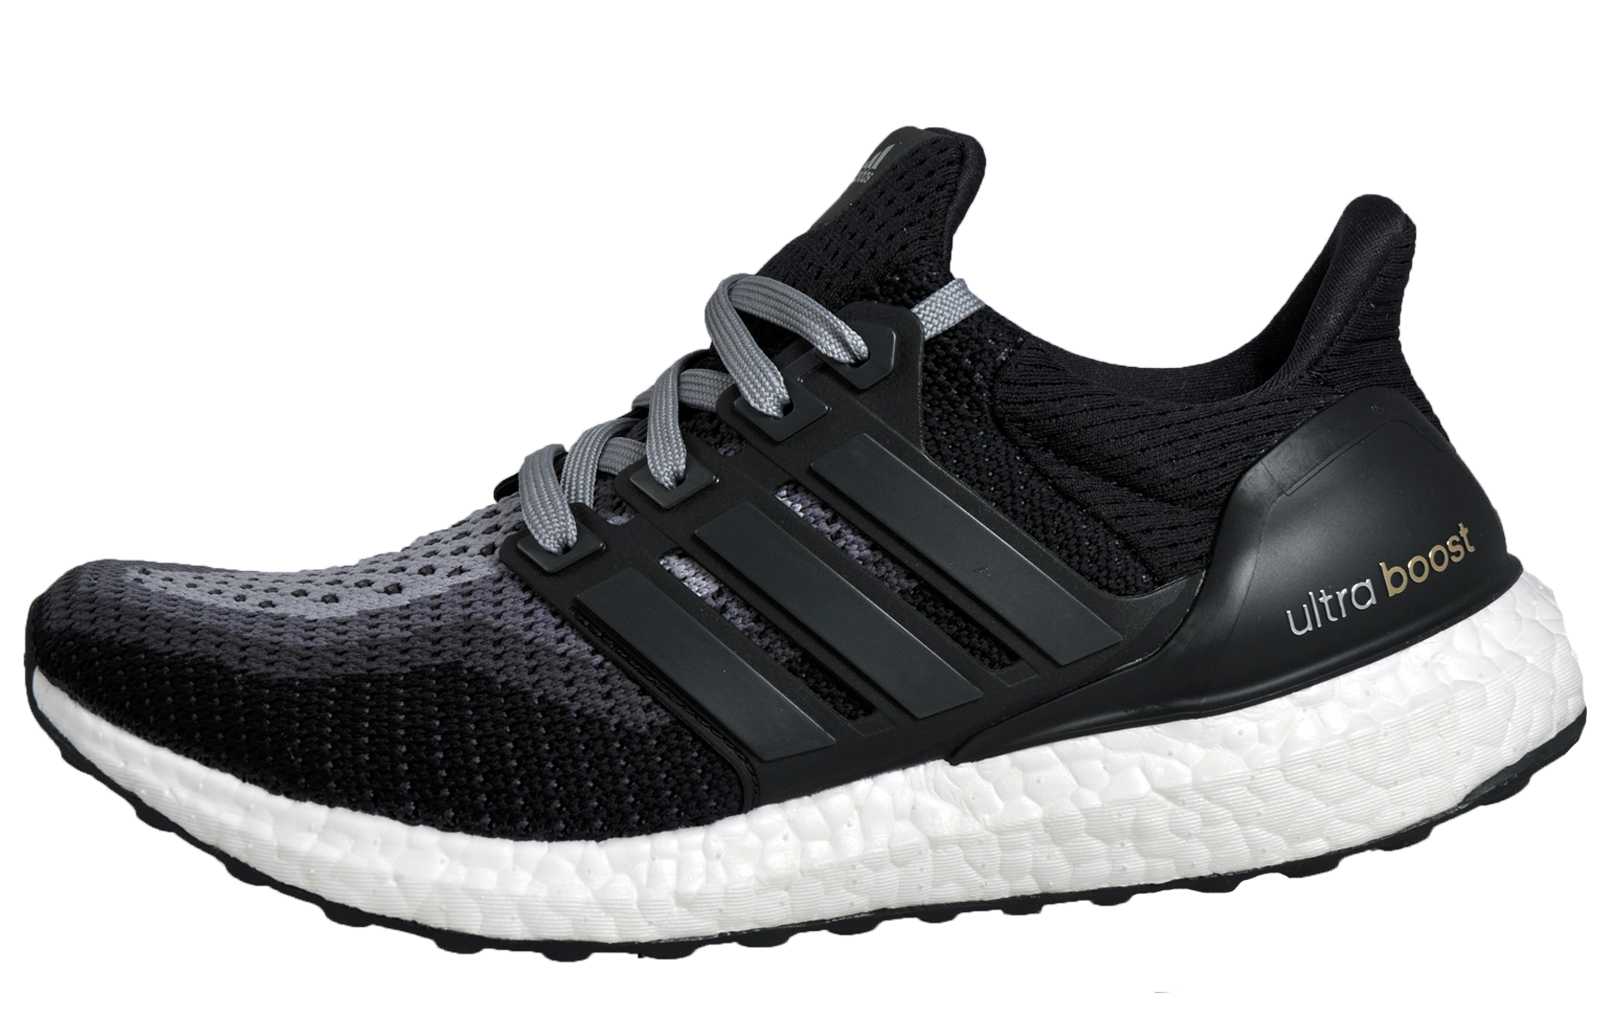 Adidas Ultra Boost Primeknit Mens Running Shoes Fitness Gym Trainers ...